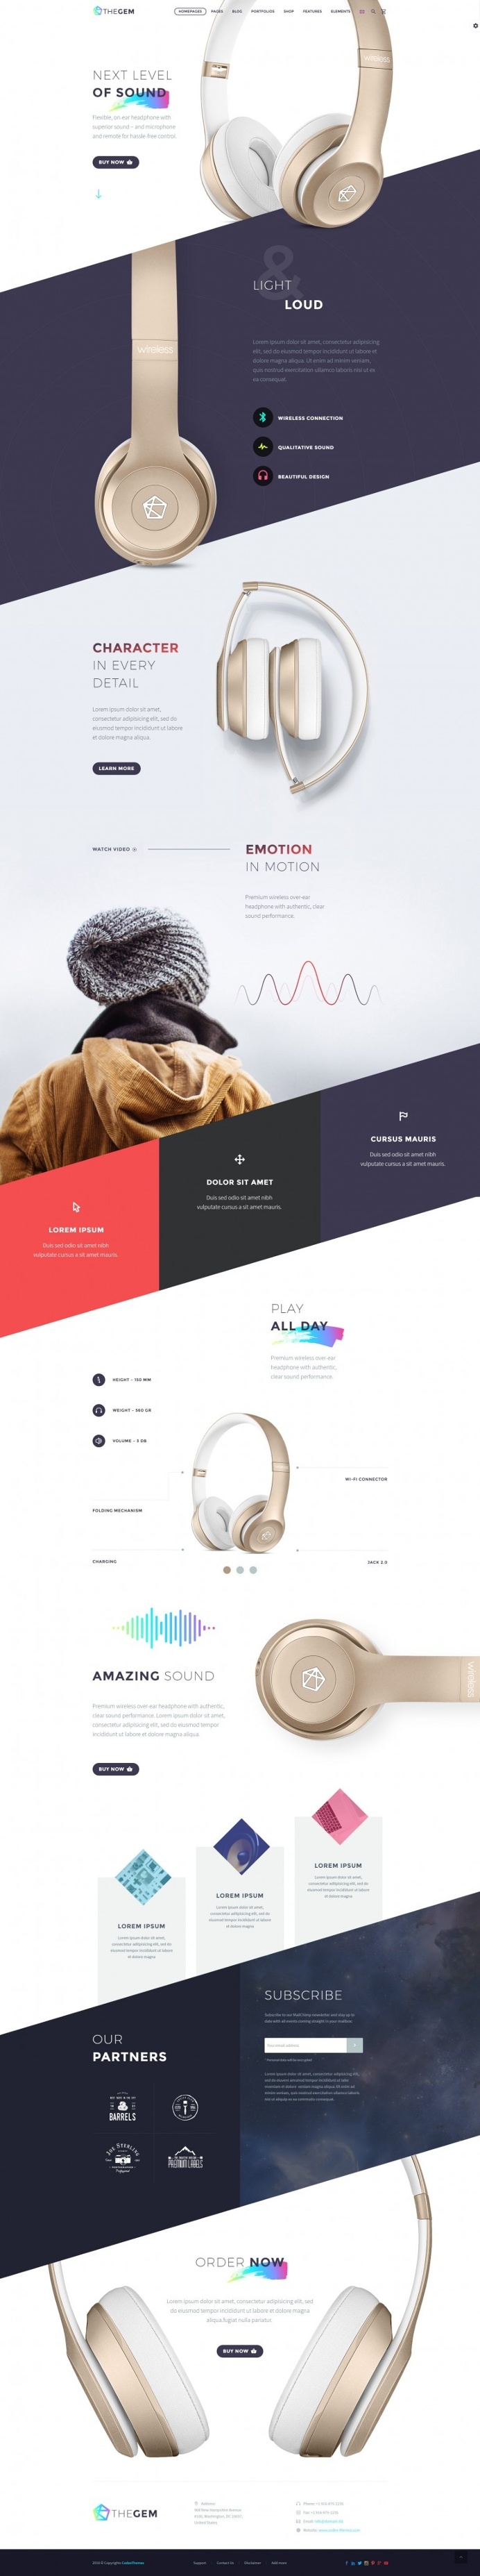 Product Page screen design idea #93: TheGem – Creative Product Landing Page